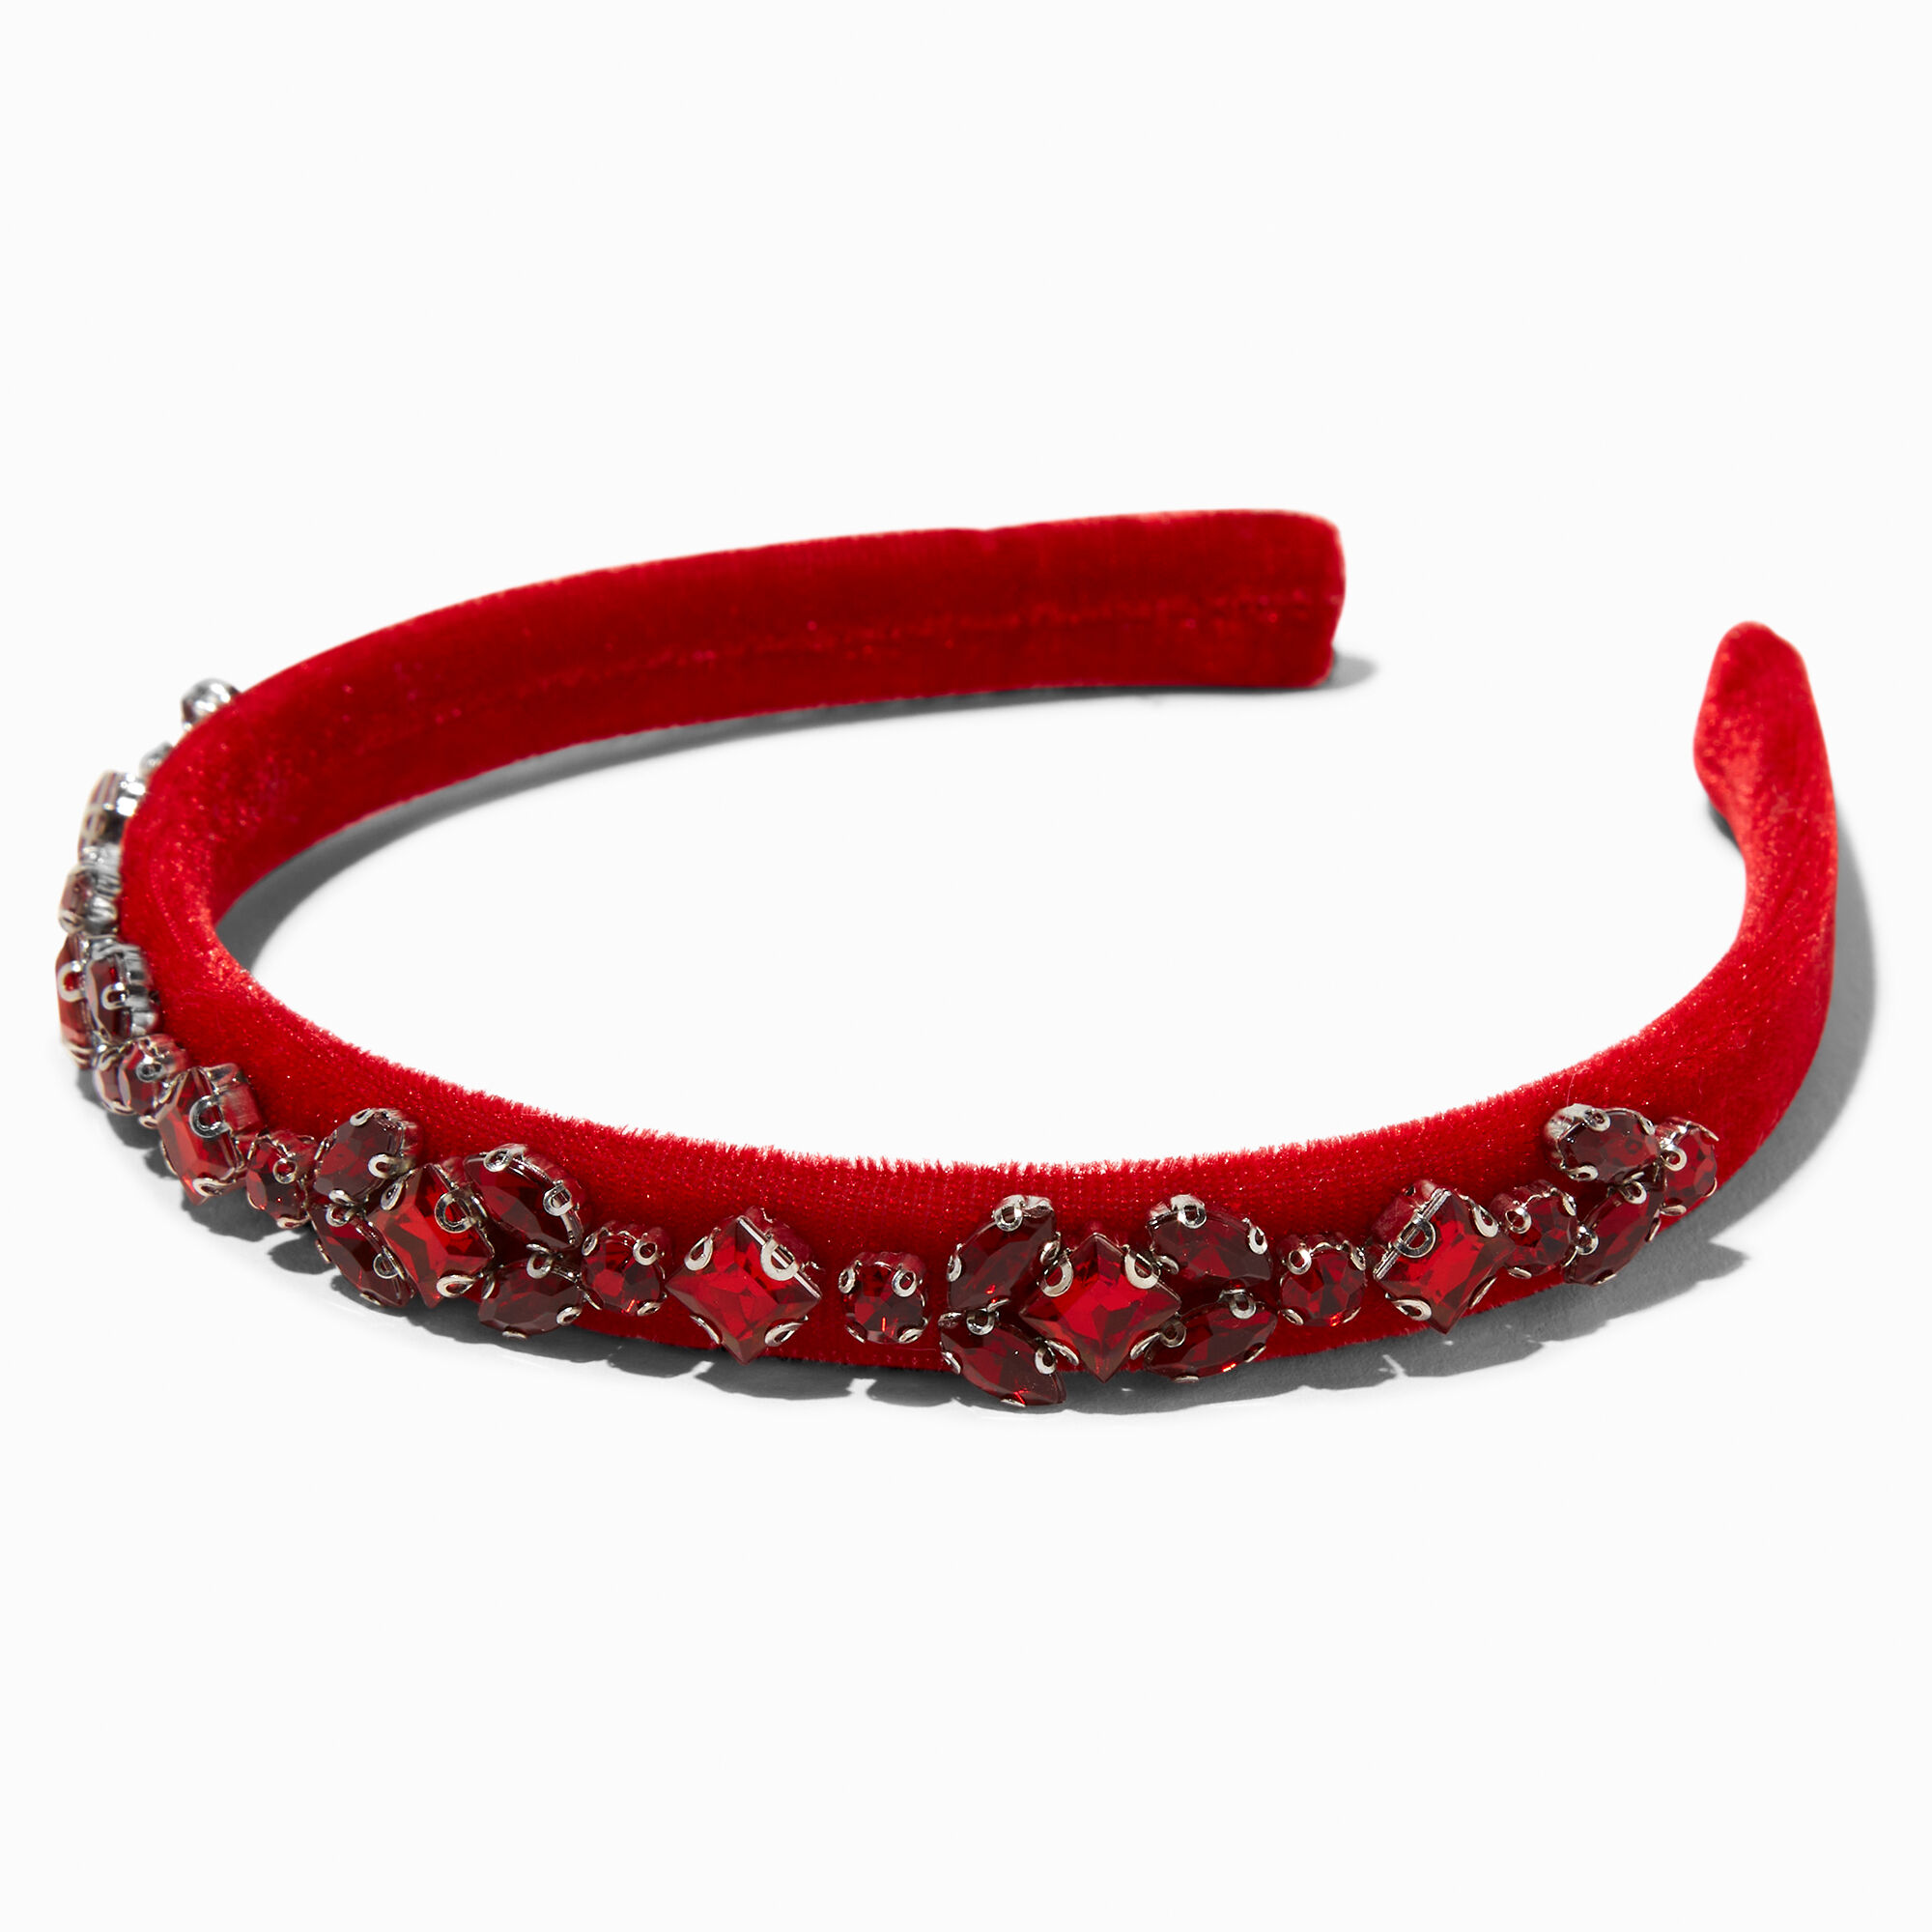 View Claires Velvet Bejewelled Skinny Headband Red information